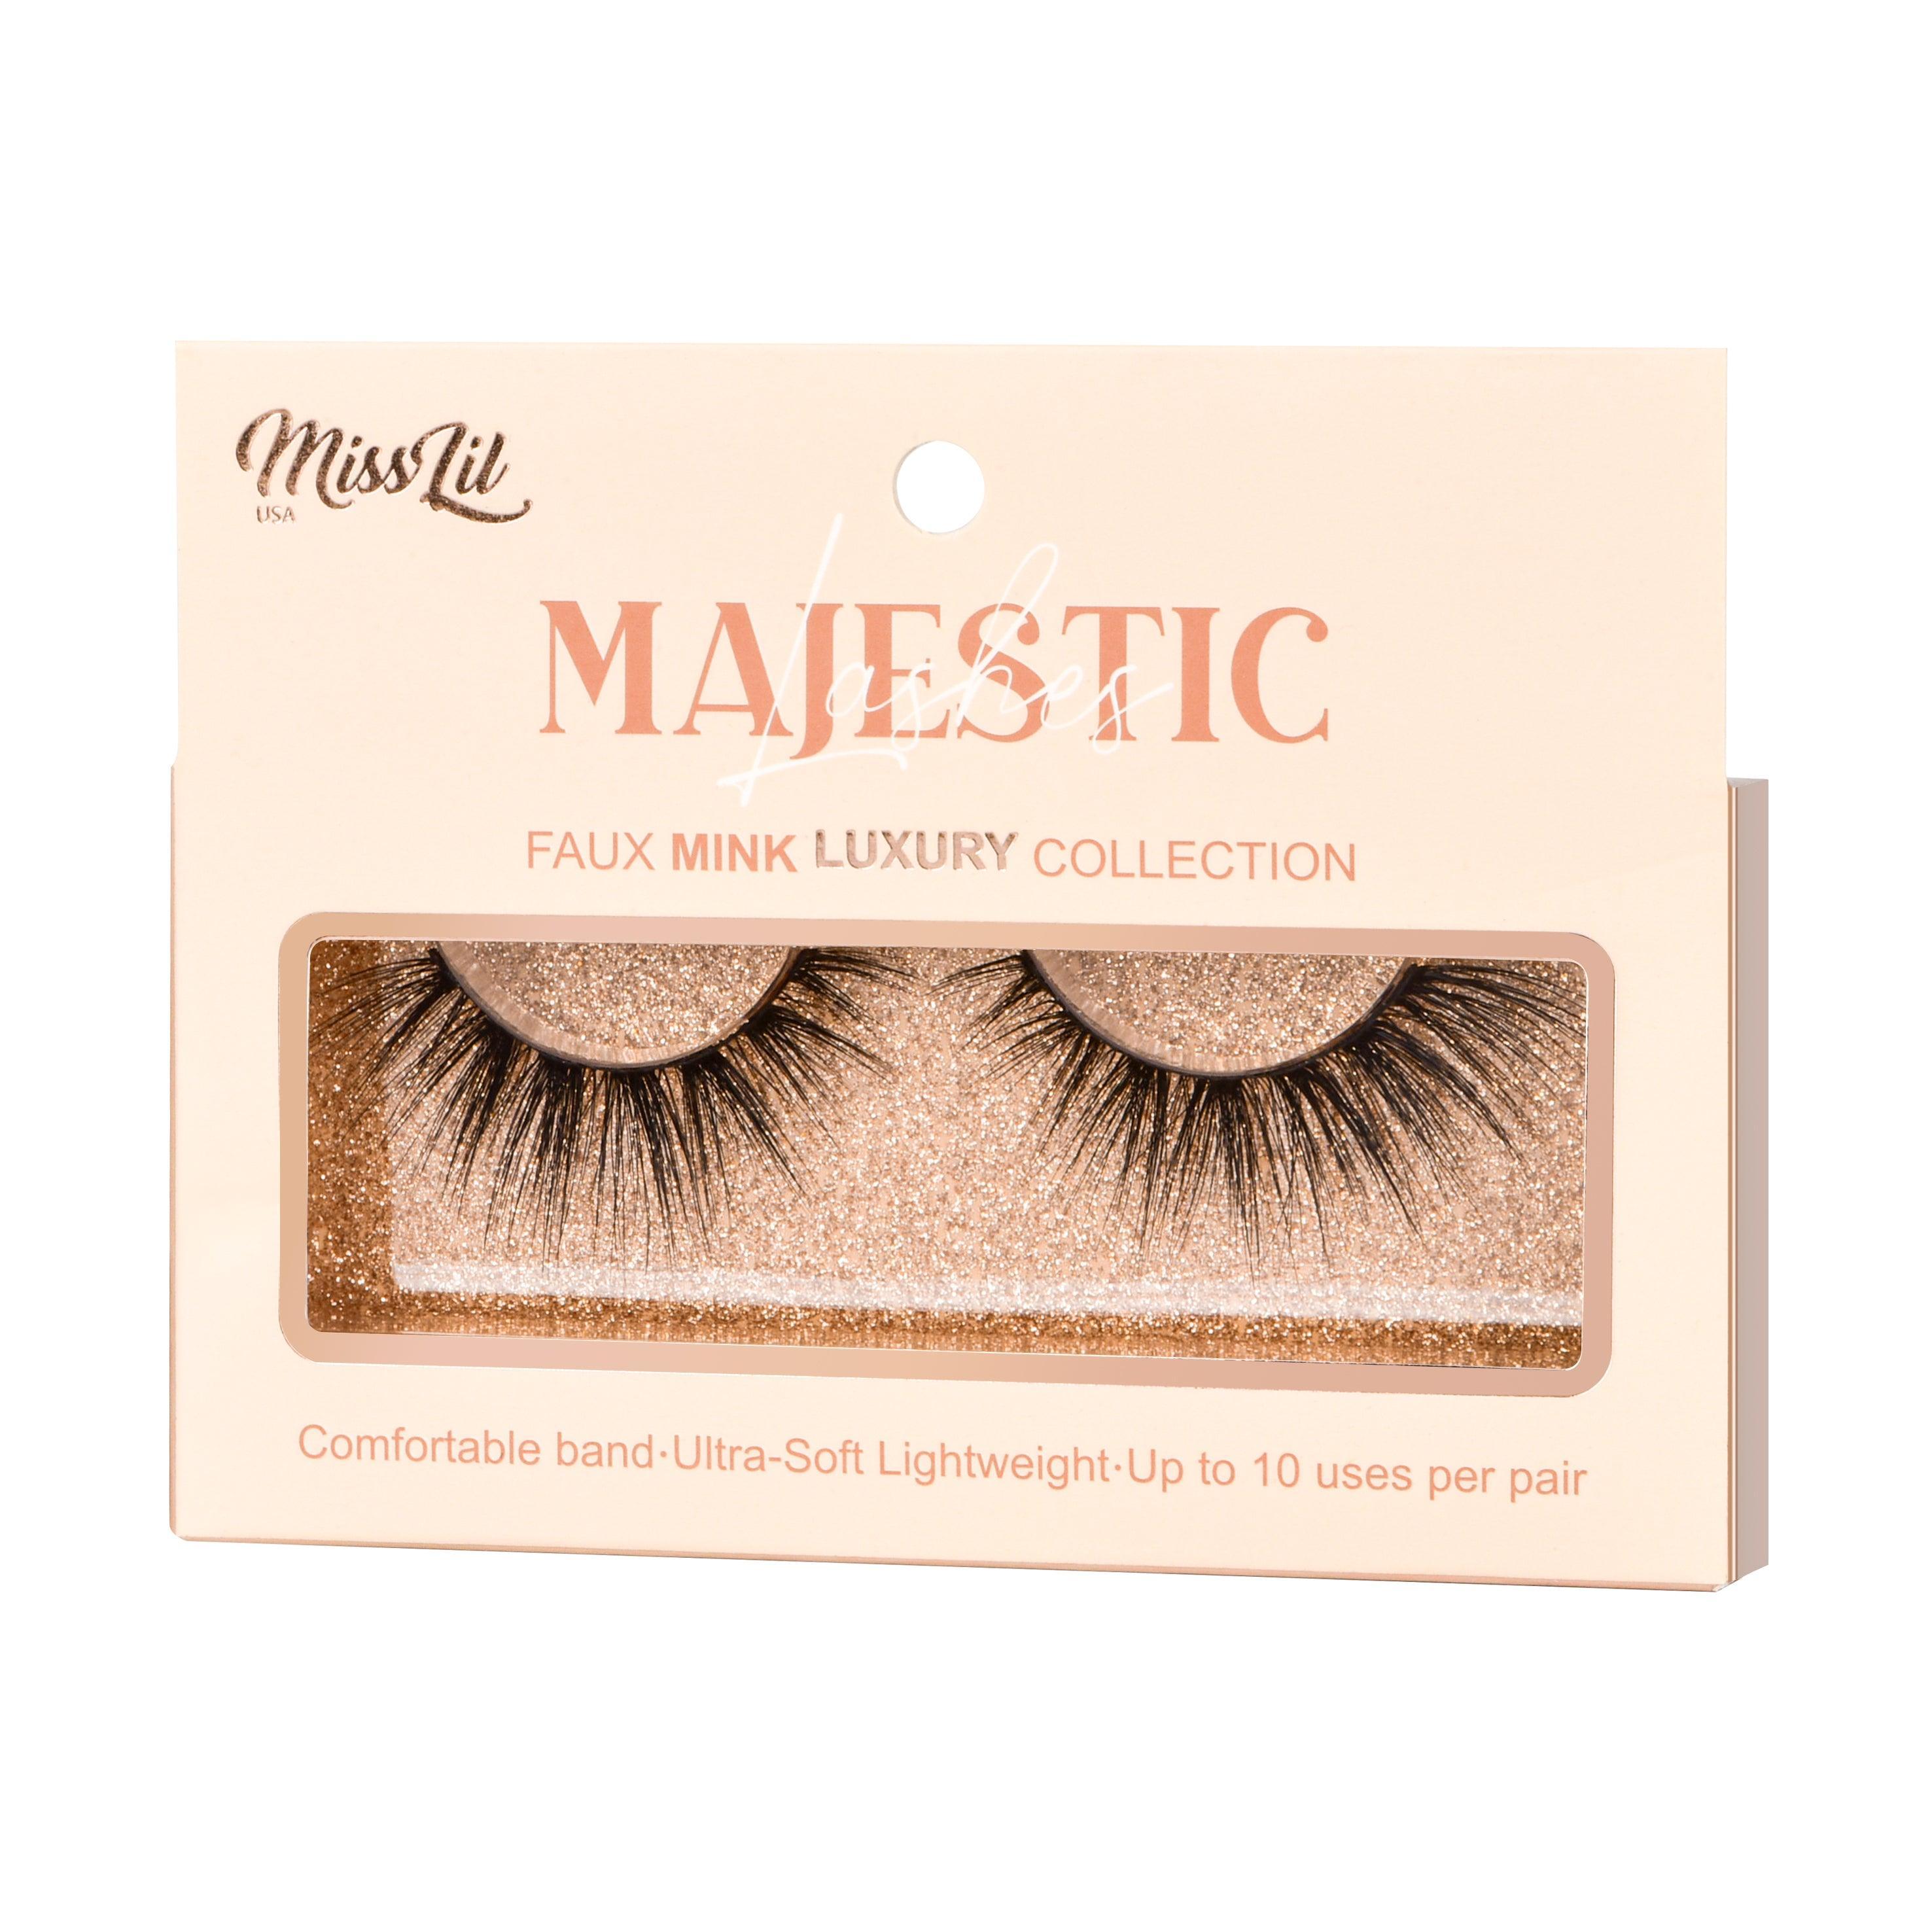 1-PAIR LASHES-MAJESTIC COLLECTION #18 (PACK OF 3) - Miss Lil USA